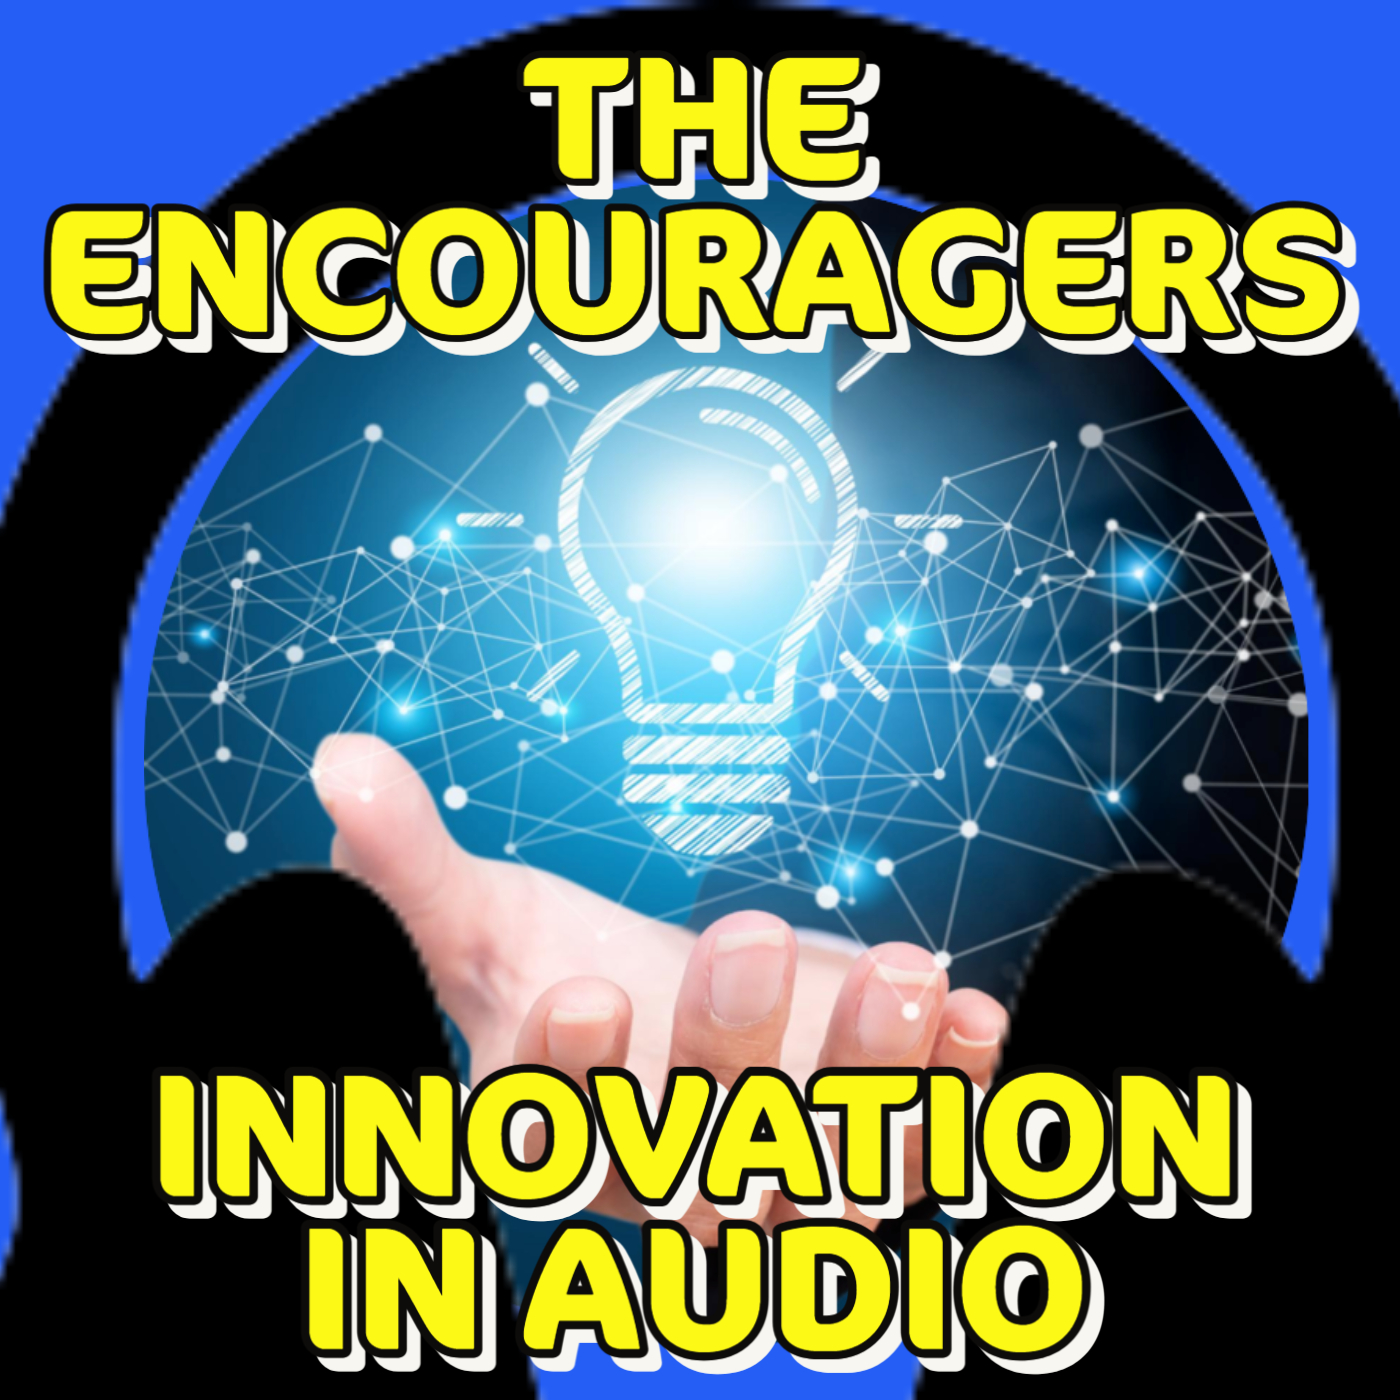 Artwork for The Encouragers "Innovation in Audio"